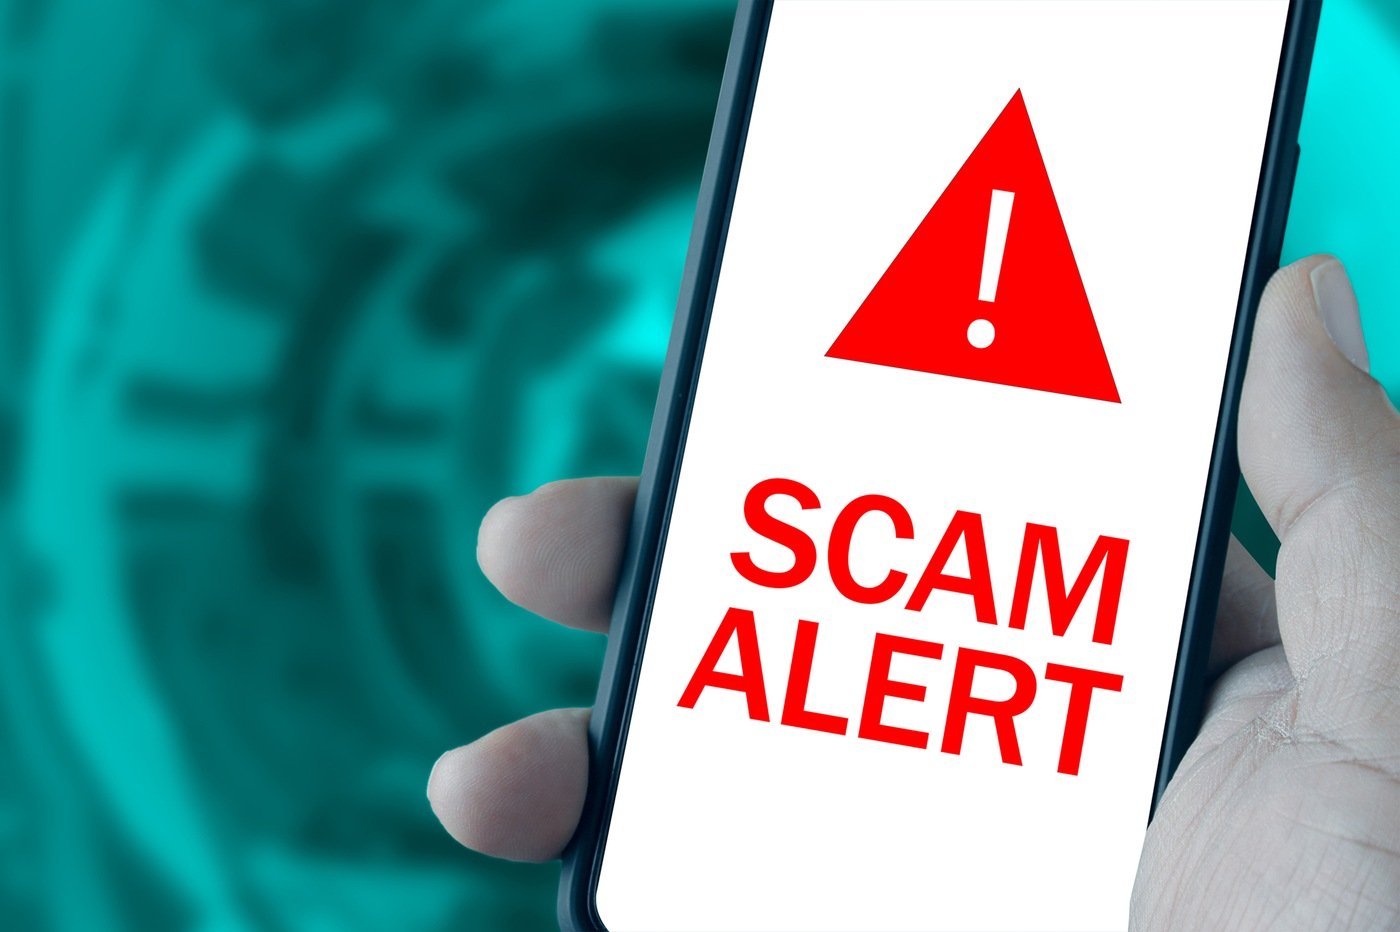 Photo of hand holding a mobile phone with a "Scam Alert" warning